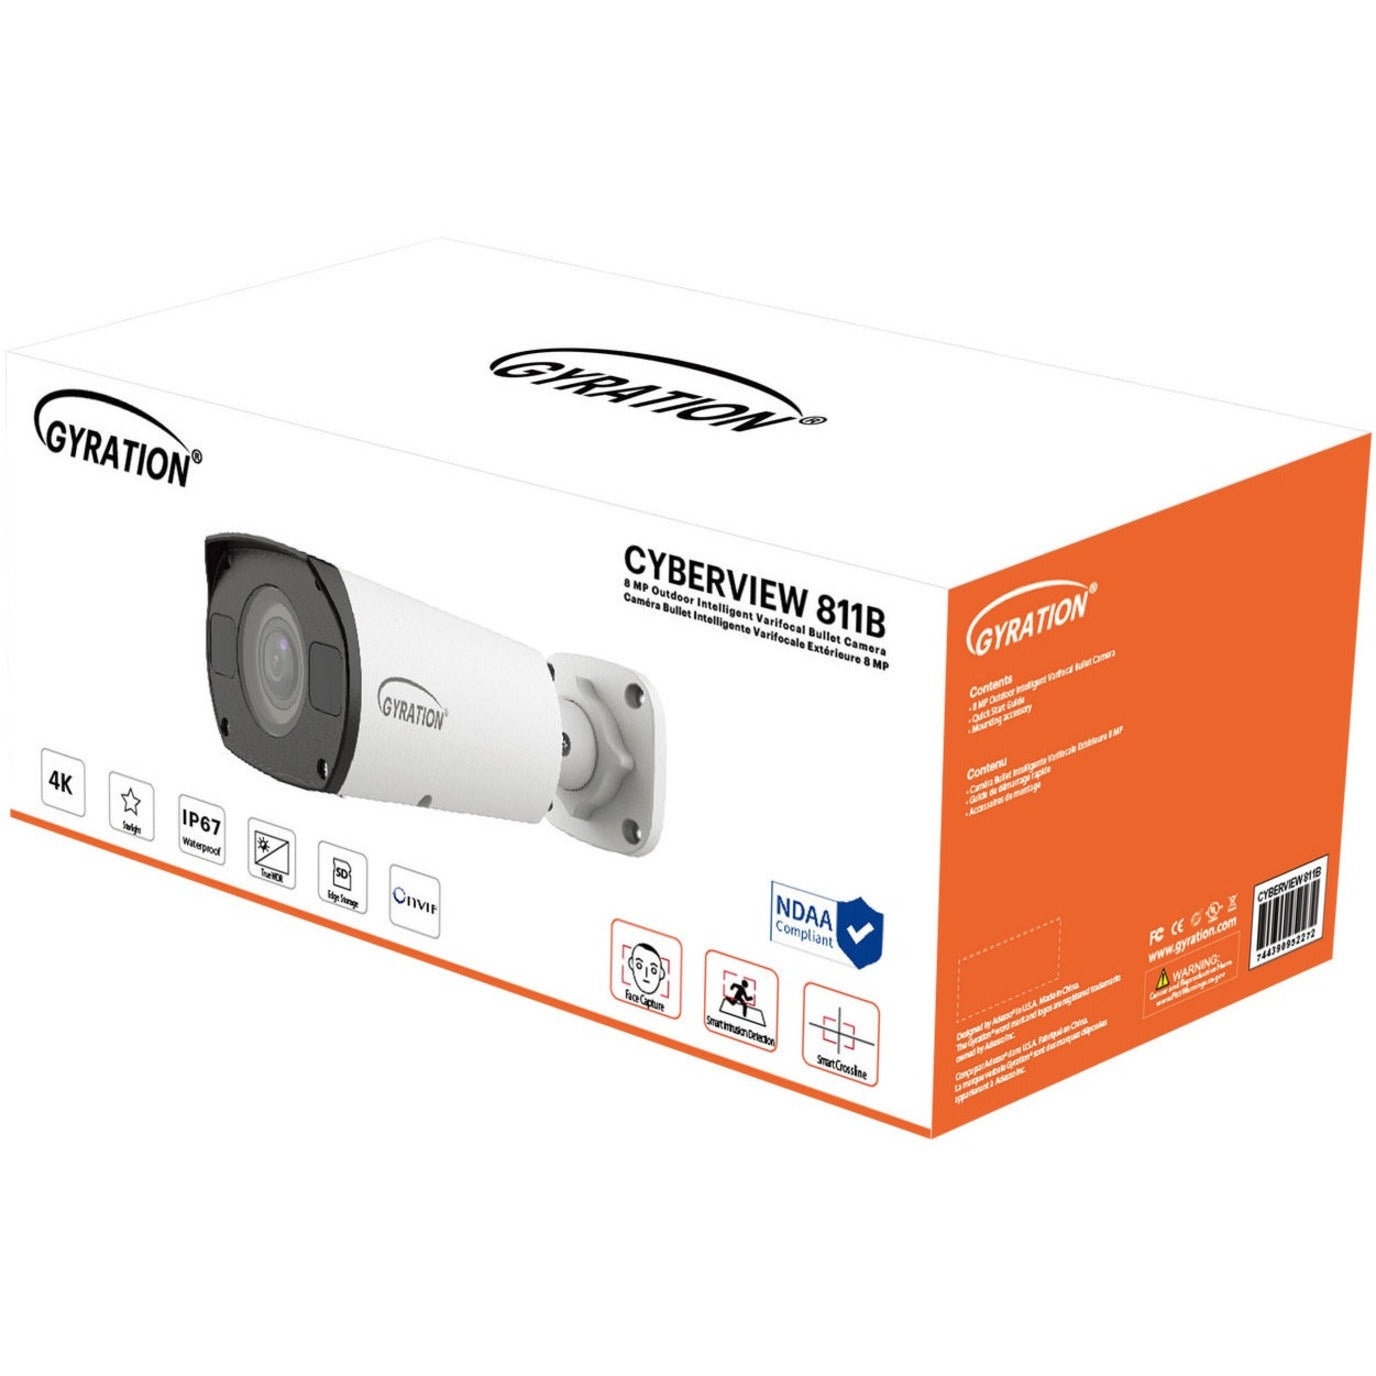 Gyration CYBERVIEW 811B 8 MP Outdoor Intelligent Varifocal Bullet Camera, 4.3x Optical Zoom, 3840 x 2160 Video Resolution, Memory Card Storage